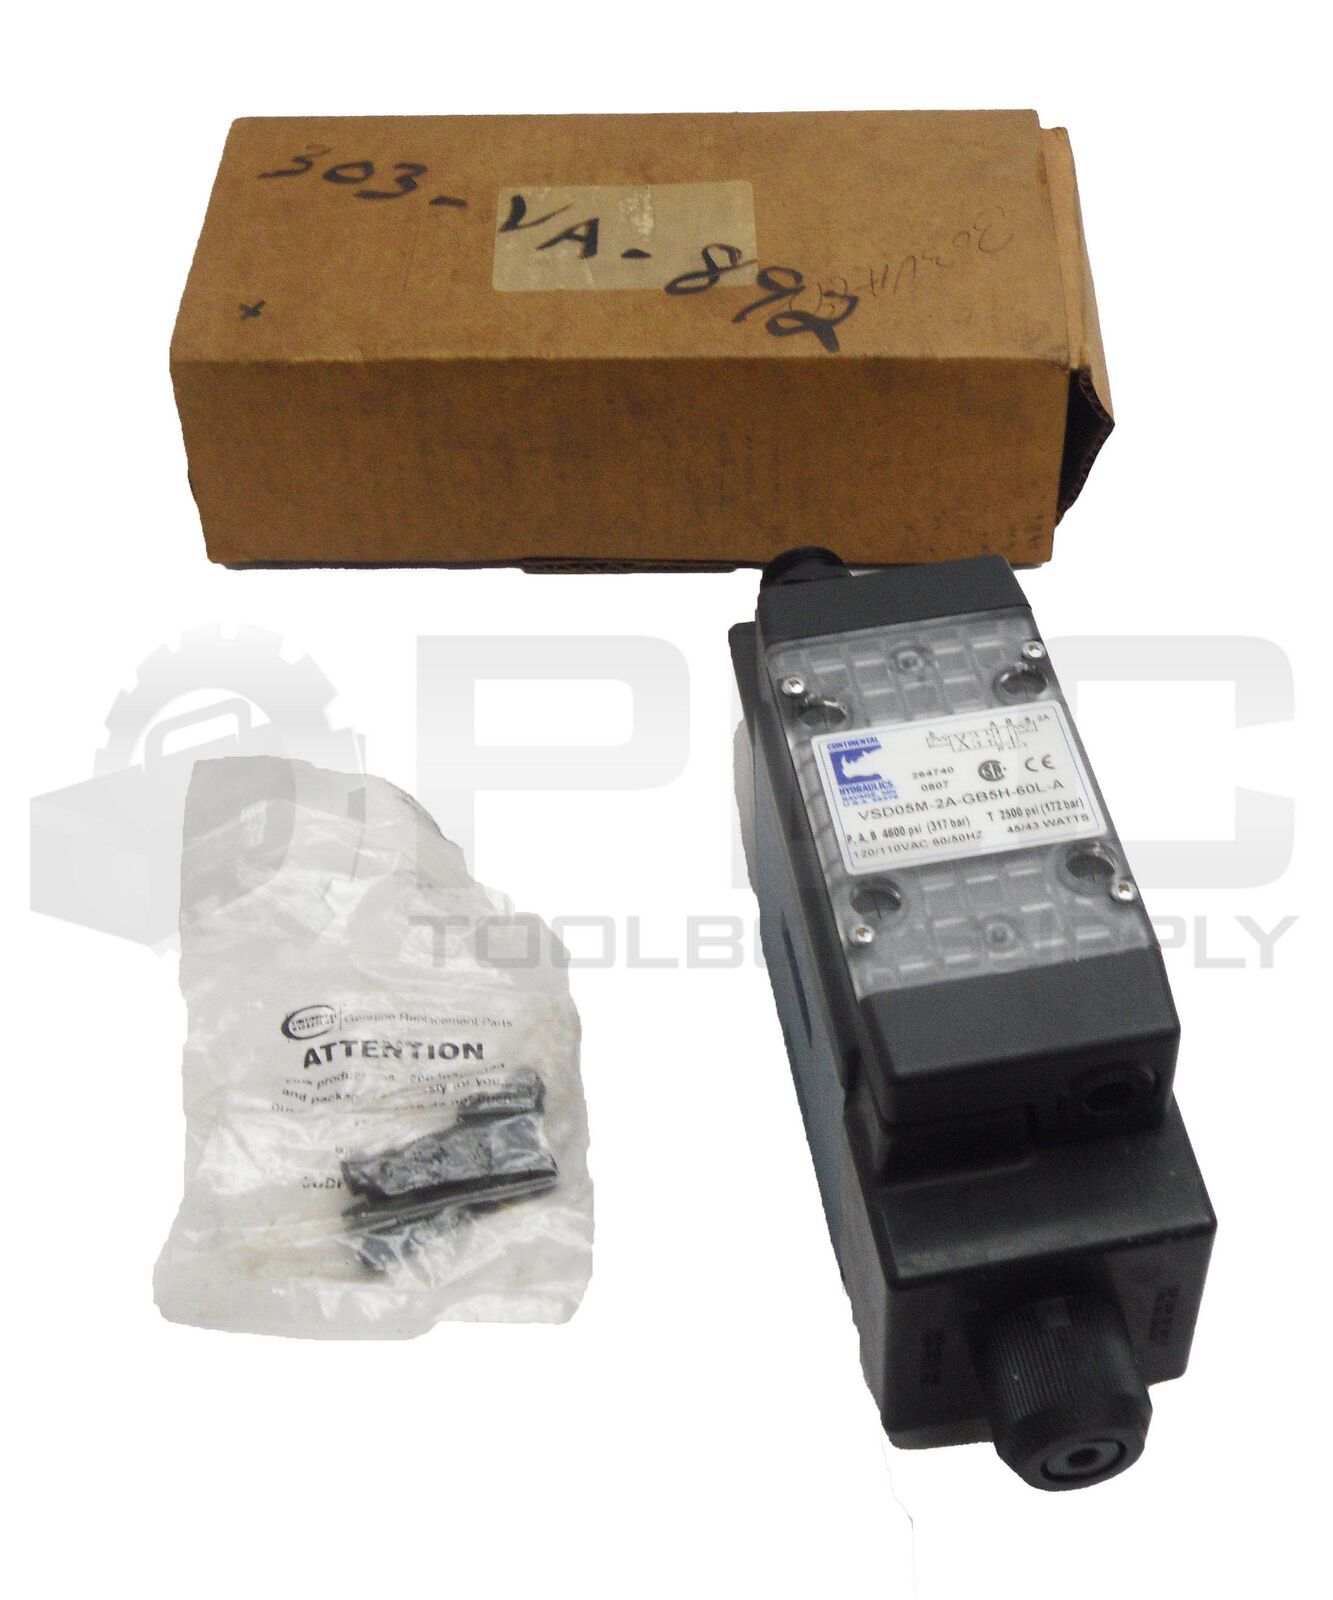 NEW CONTINENTAL HYDRAULICS VSD05M-2A-GB5H-60L-A DIRECTIONAL VALVE 4600PSI